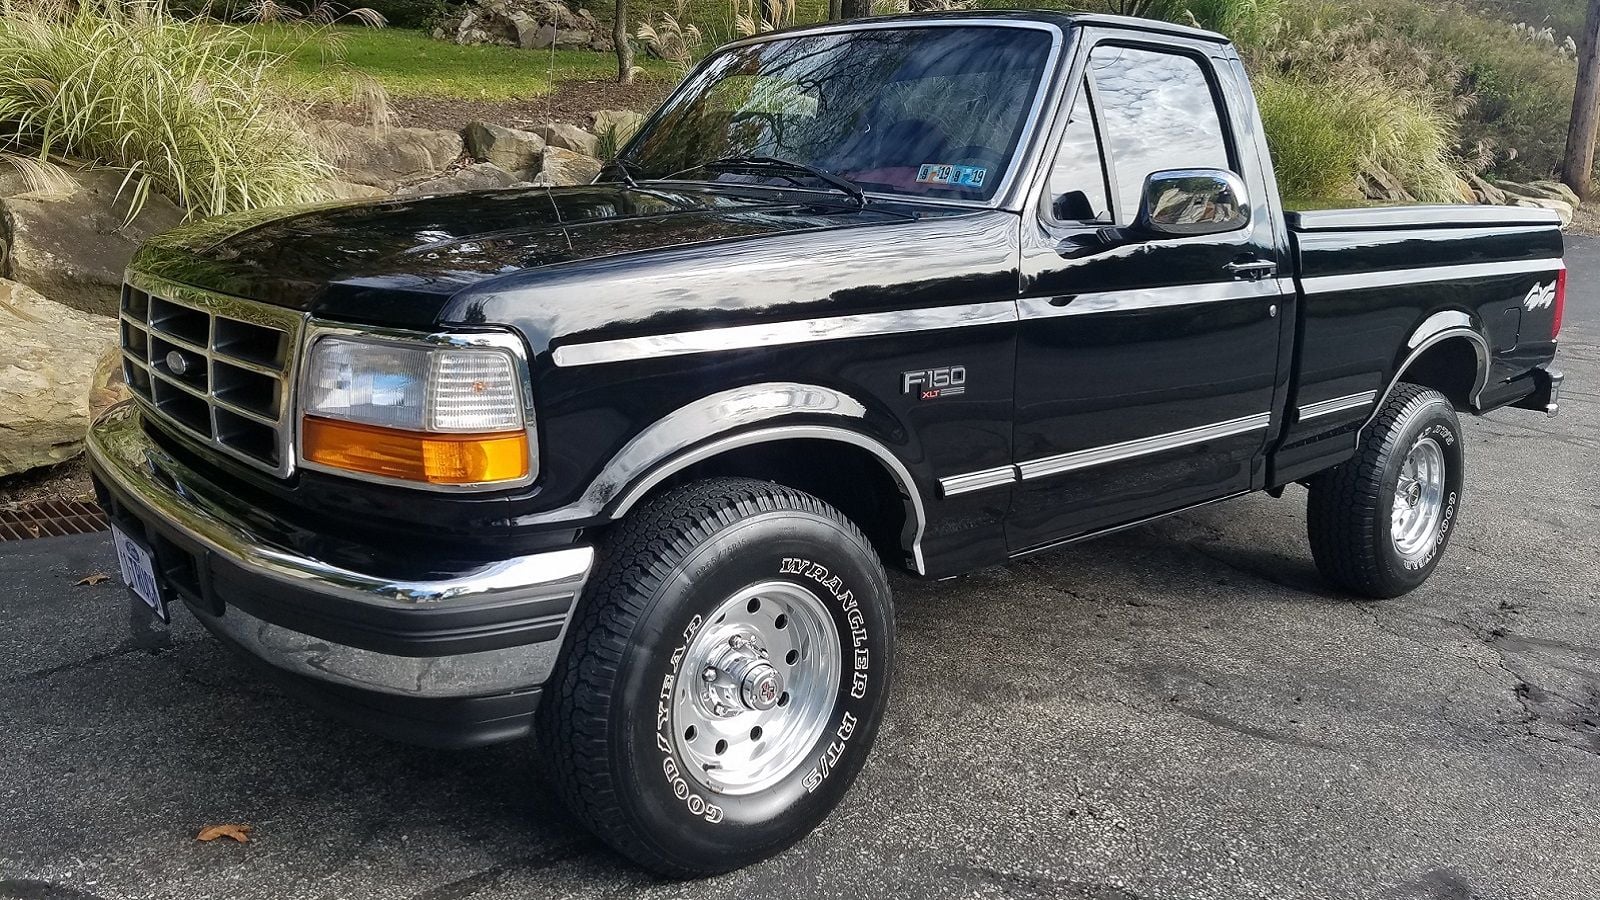 Incredibly Clean 1996 Ford F 150 Is The 9th Gen Of Our Dreams Ford Trucks